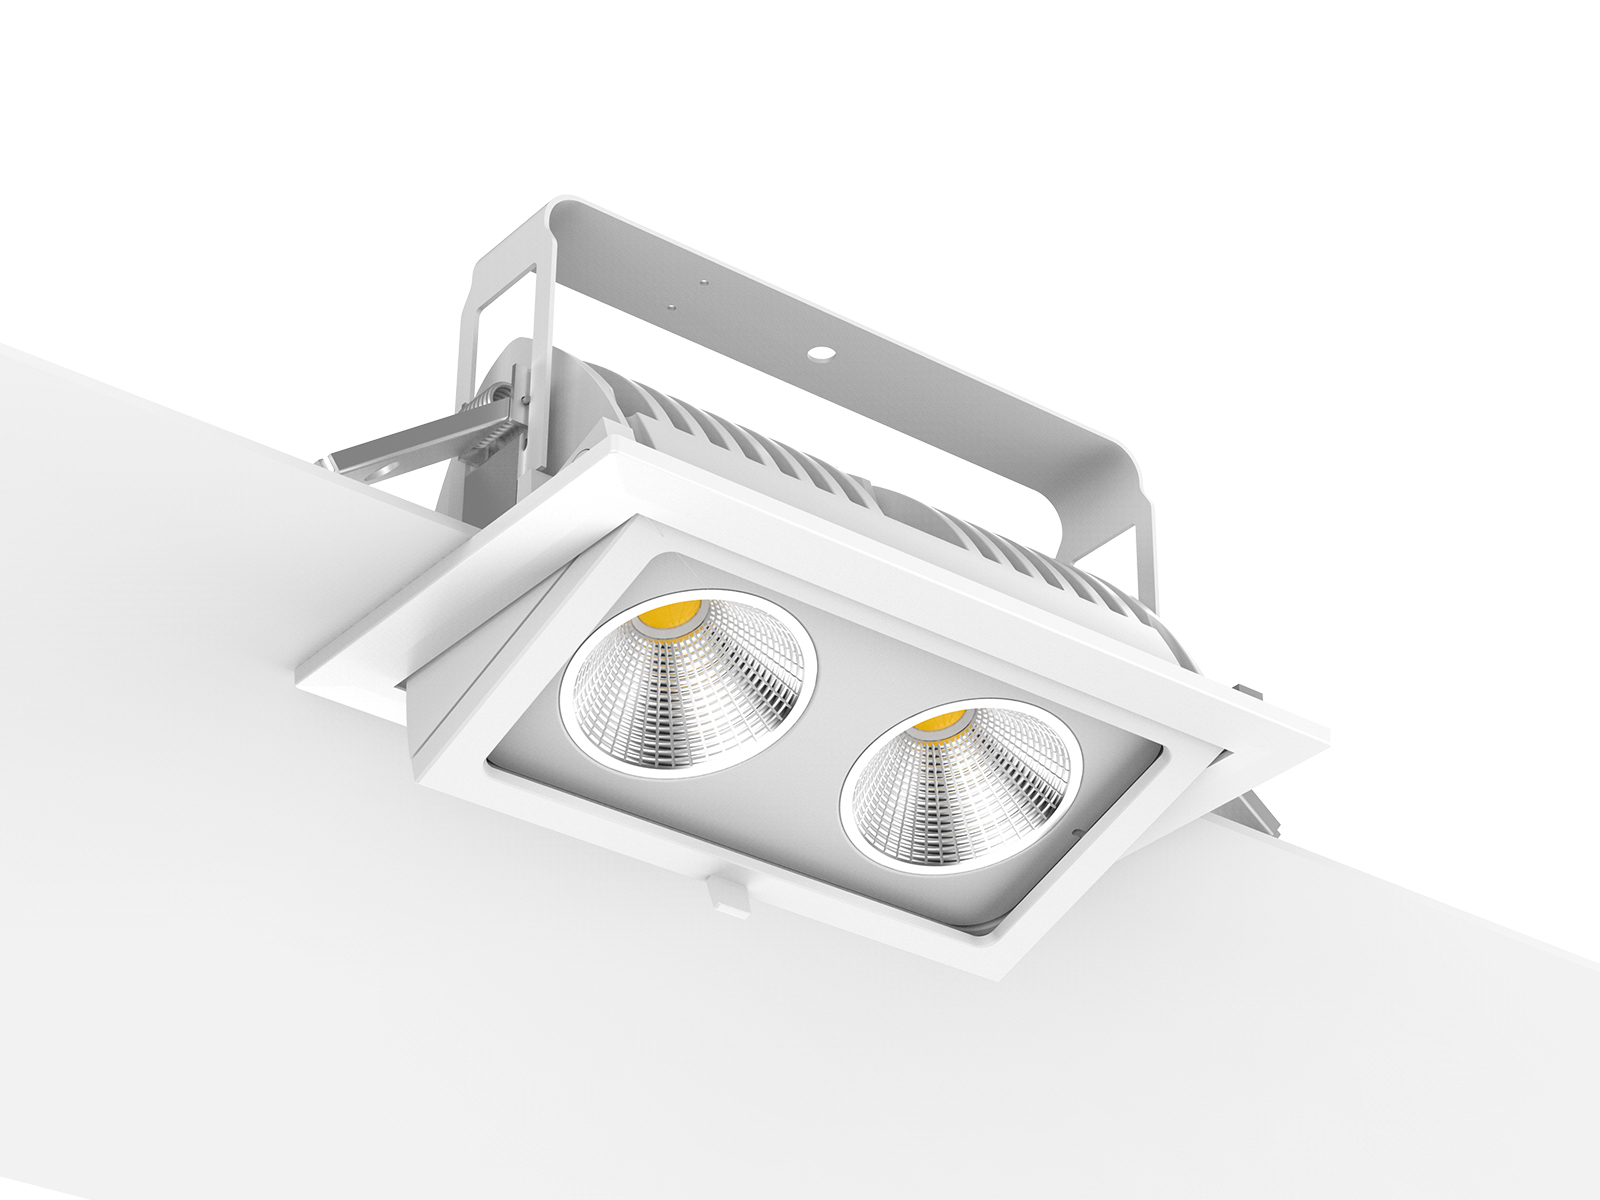 ip65 rated Rectangle Downlight